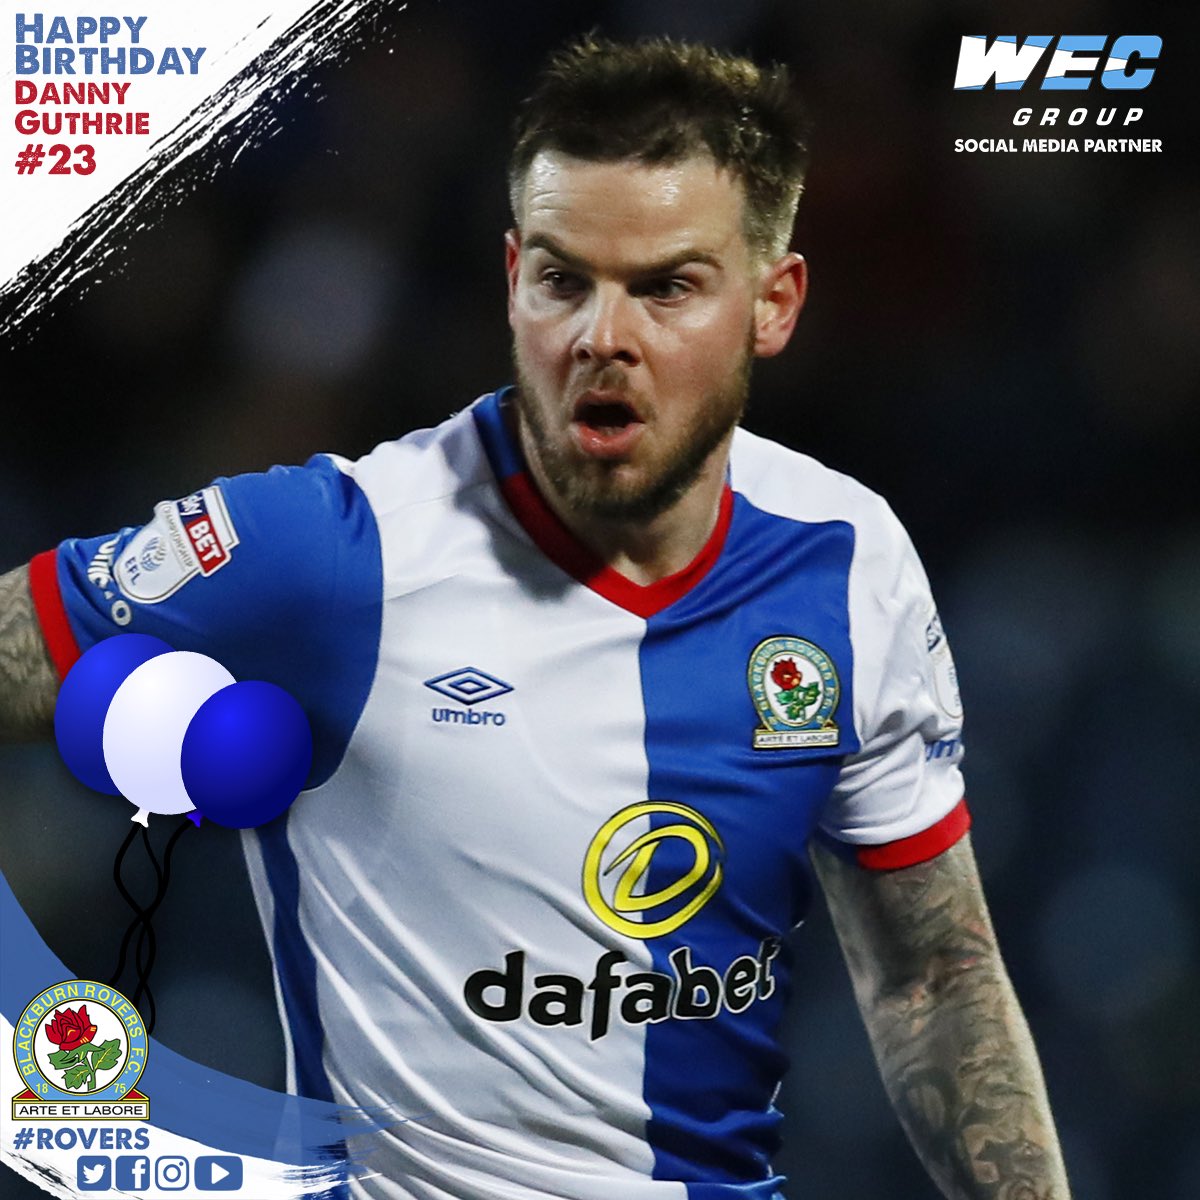 Happy Birthday to midfielder Danny Guthrie, who turns 30 today.    